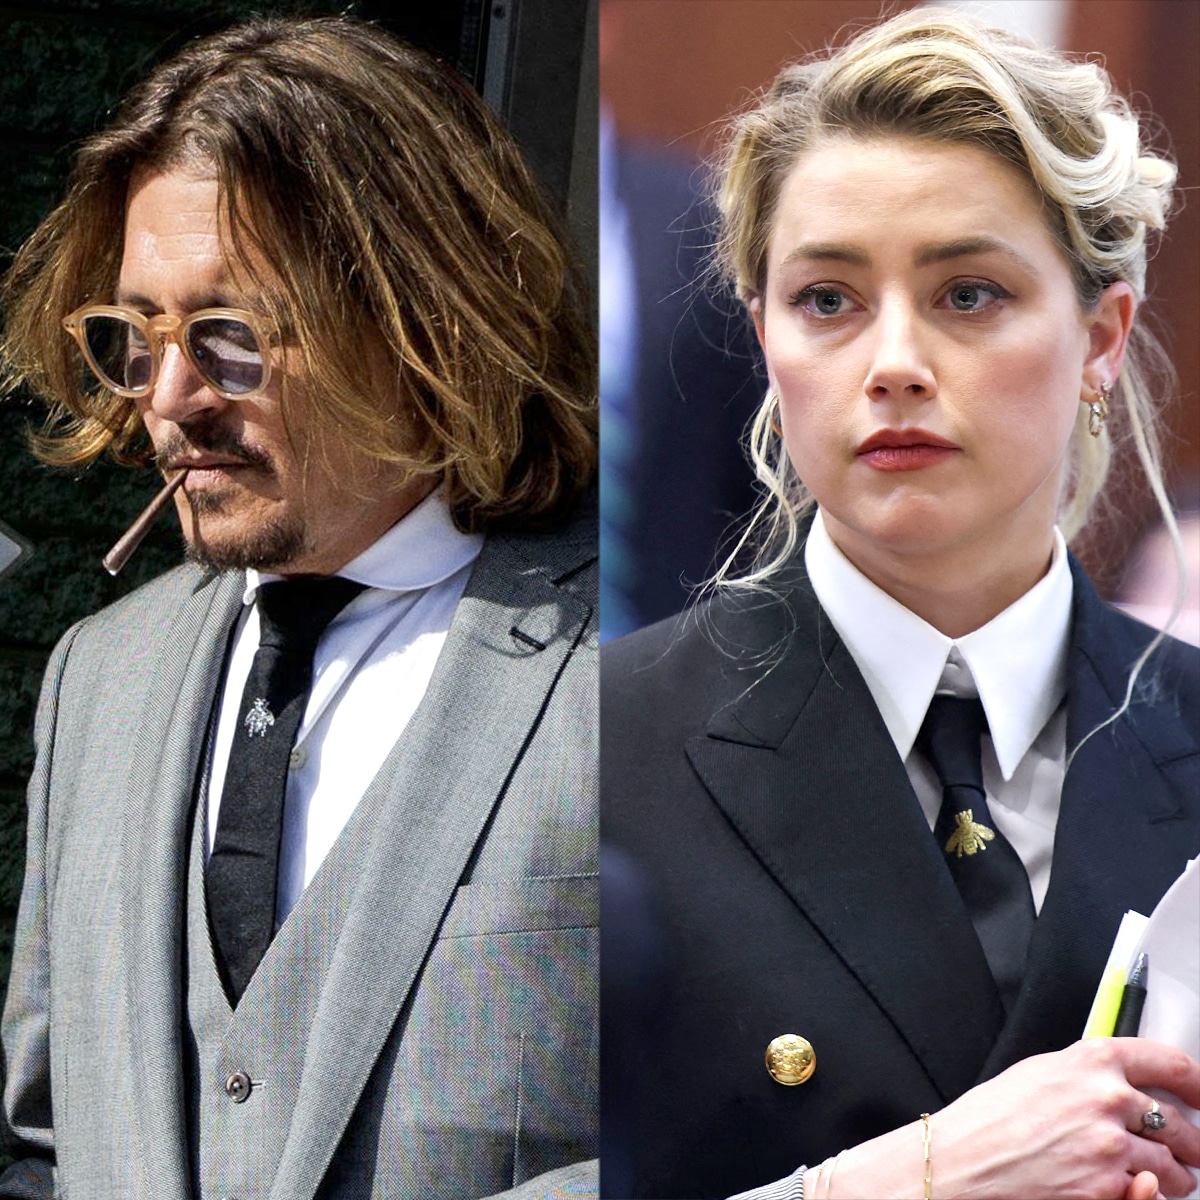 Johnny Depp and Amber Heard at the Court